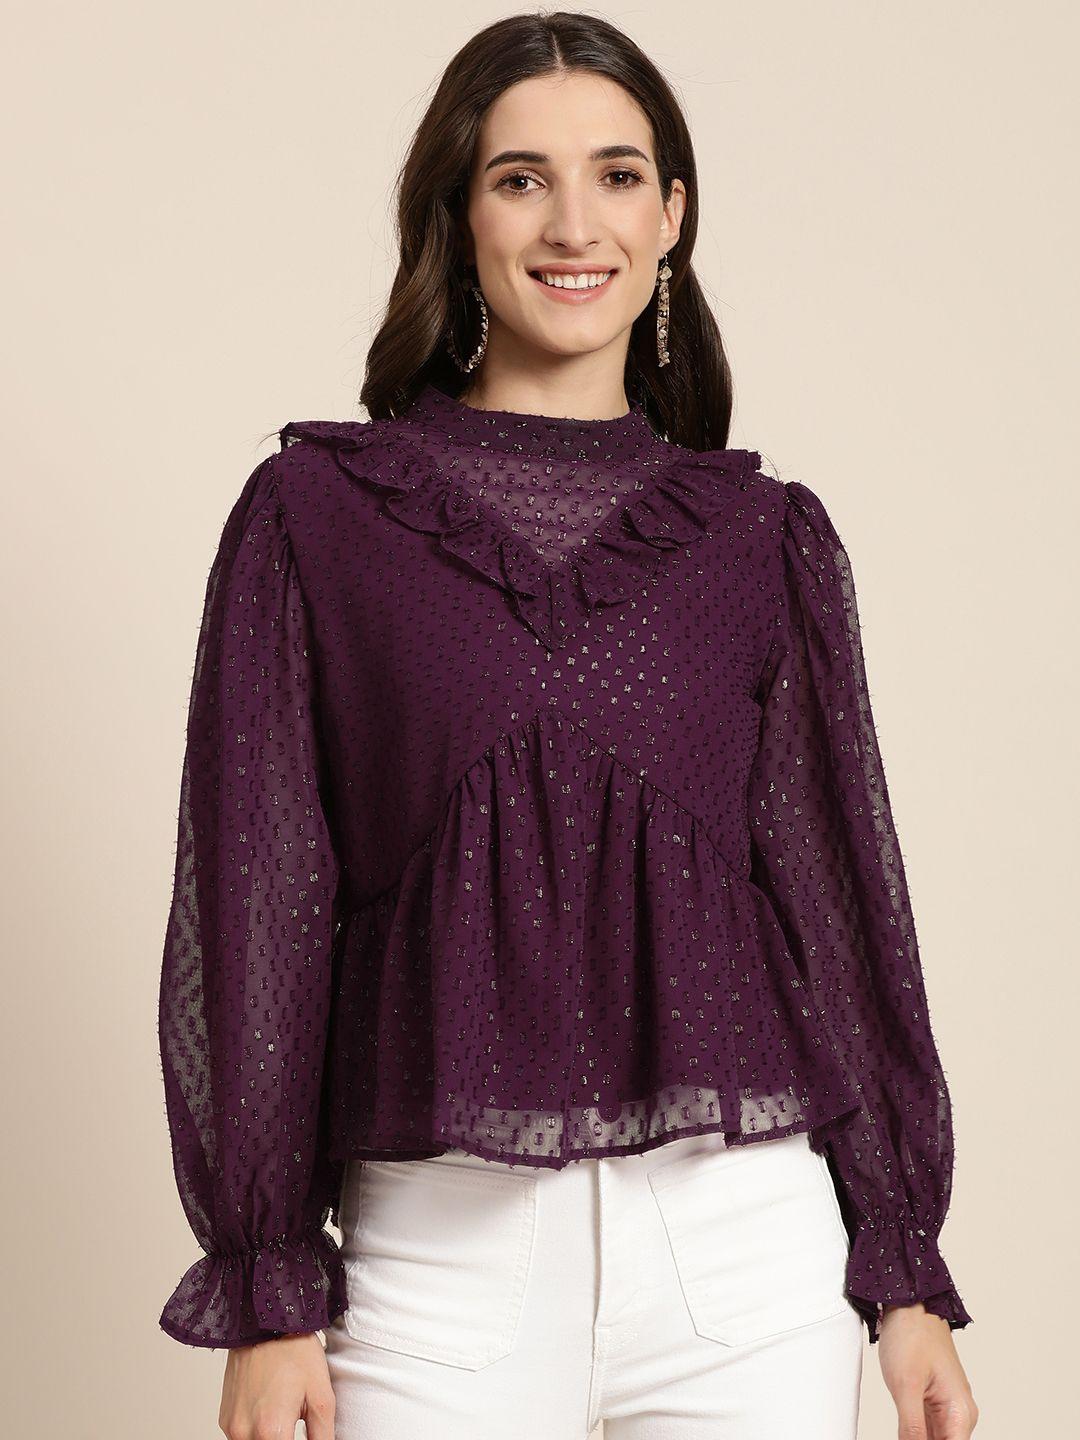 marie claire dark purple self design band collar bell sleeves pleated polyester top